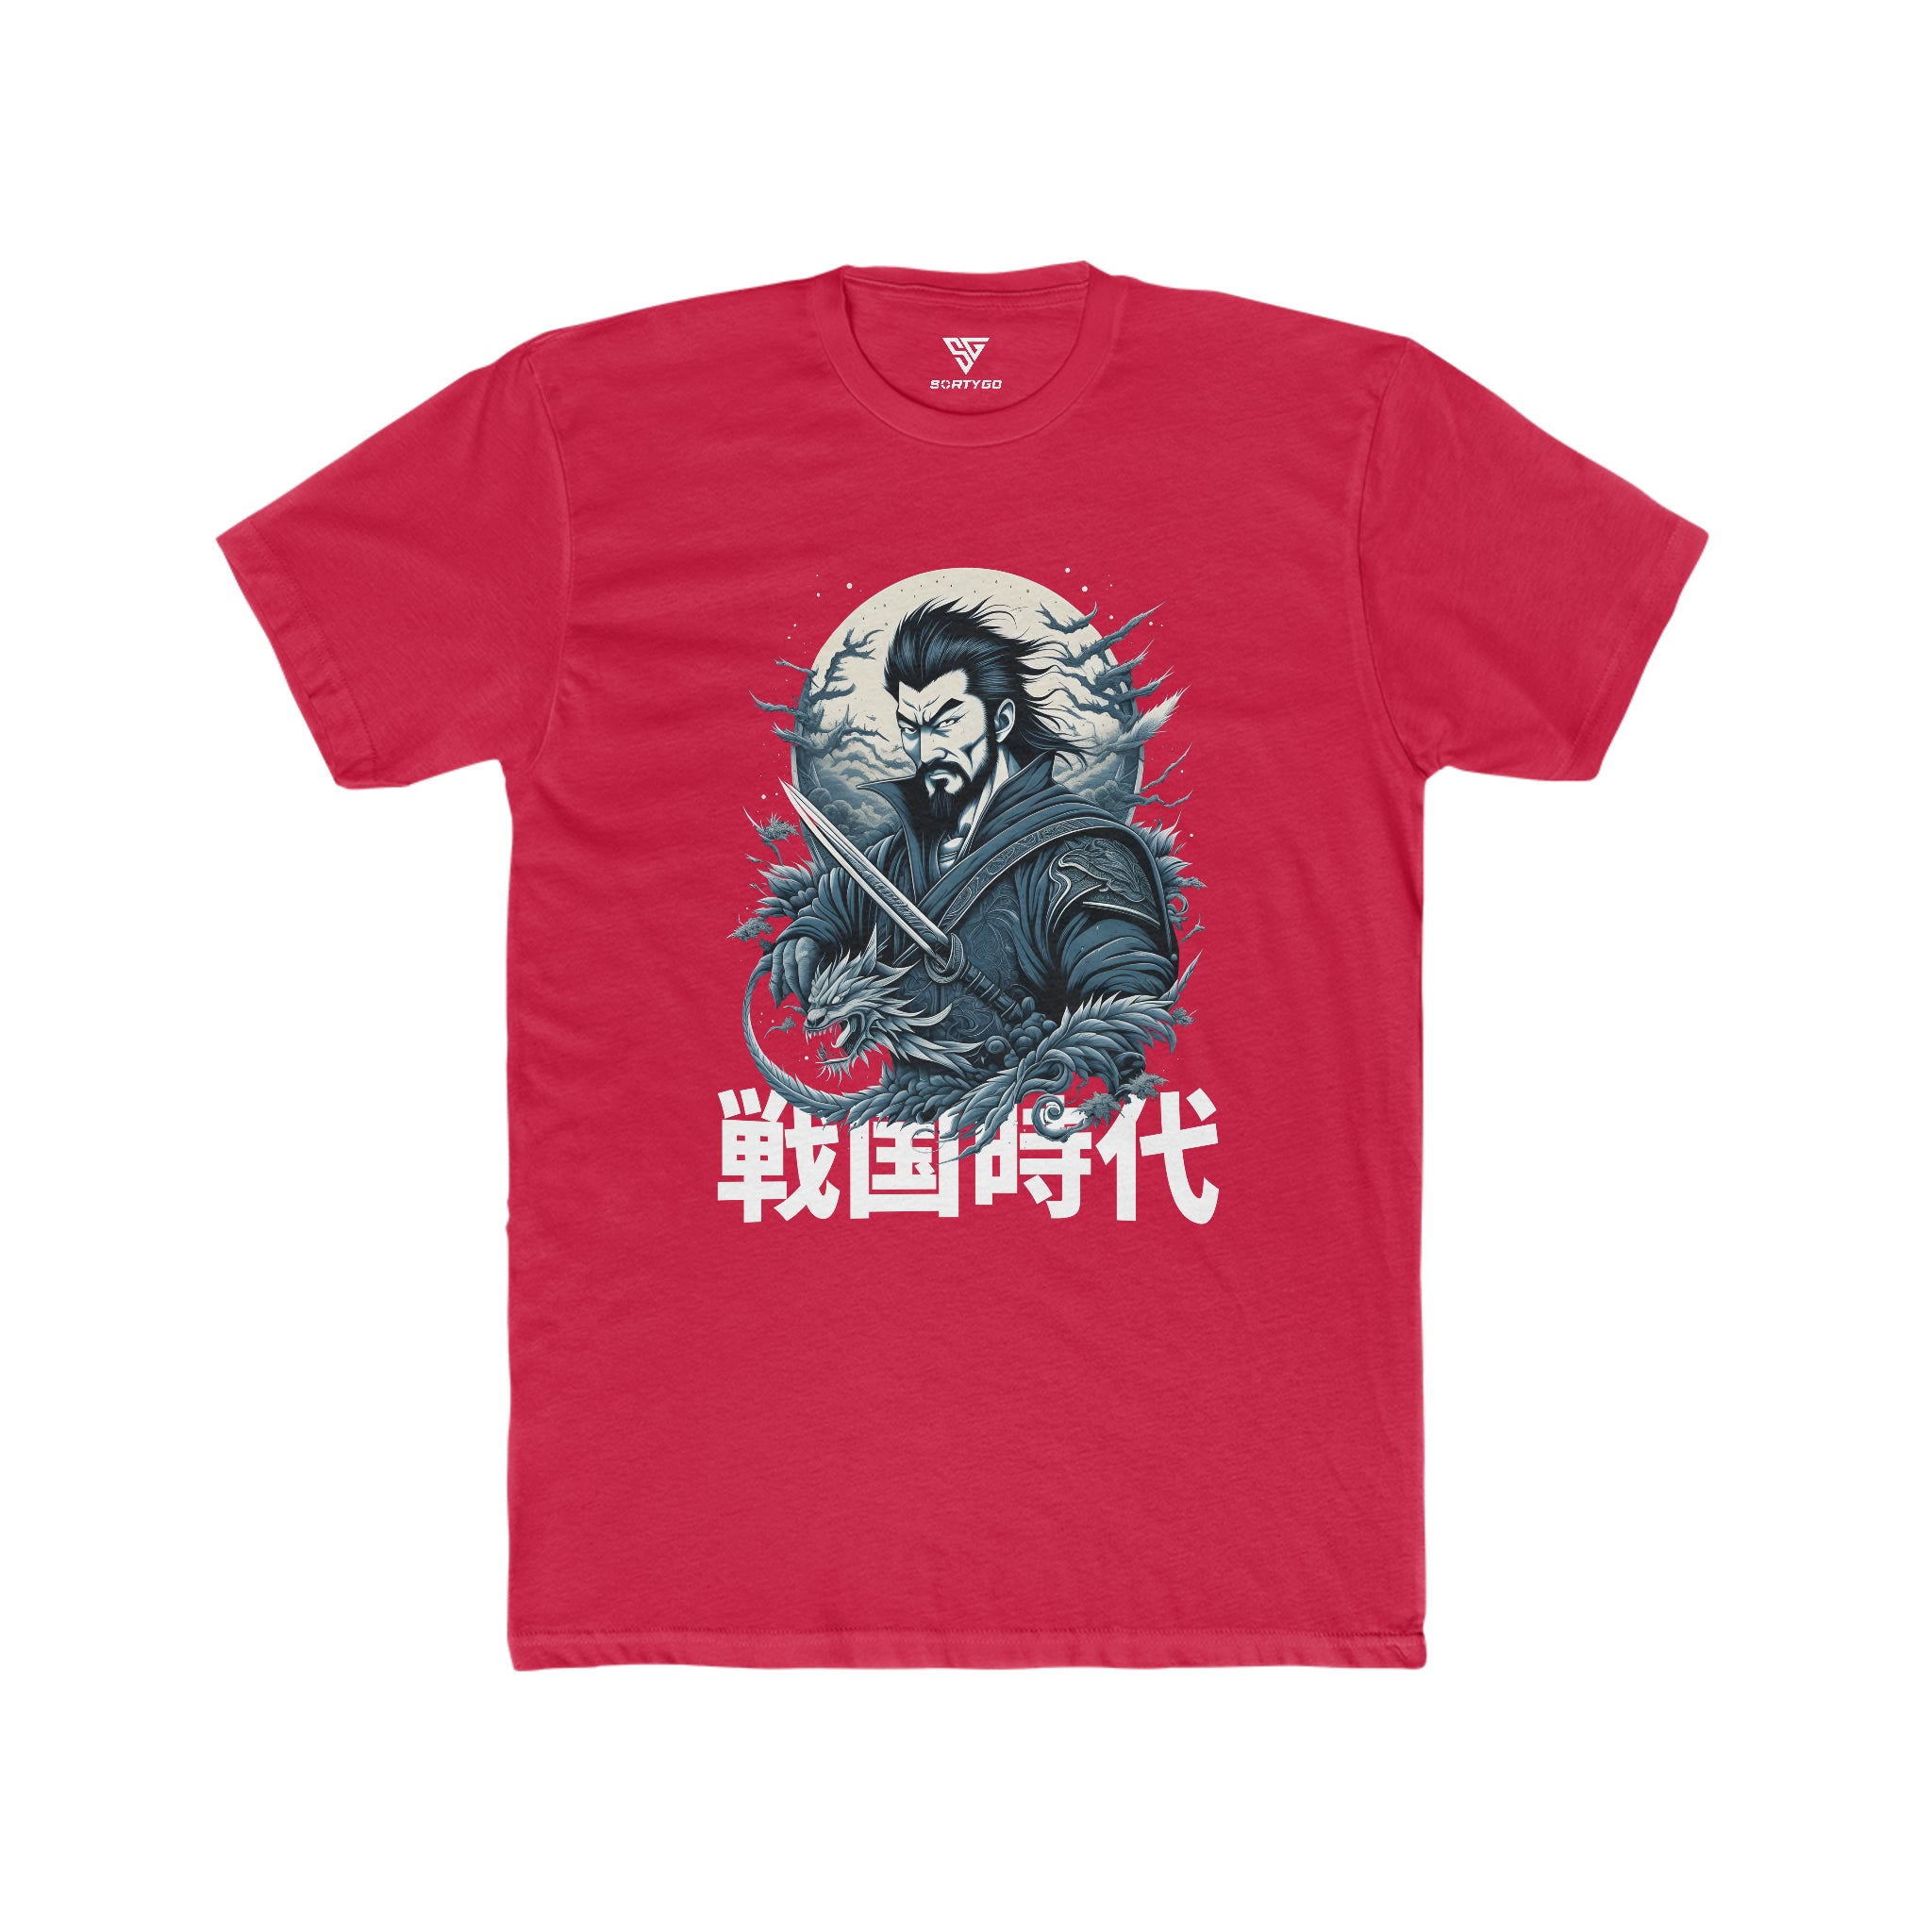 SORTYGO - Japanese Warrior Men Fitted T-Shirt in Solid Red